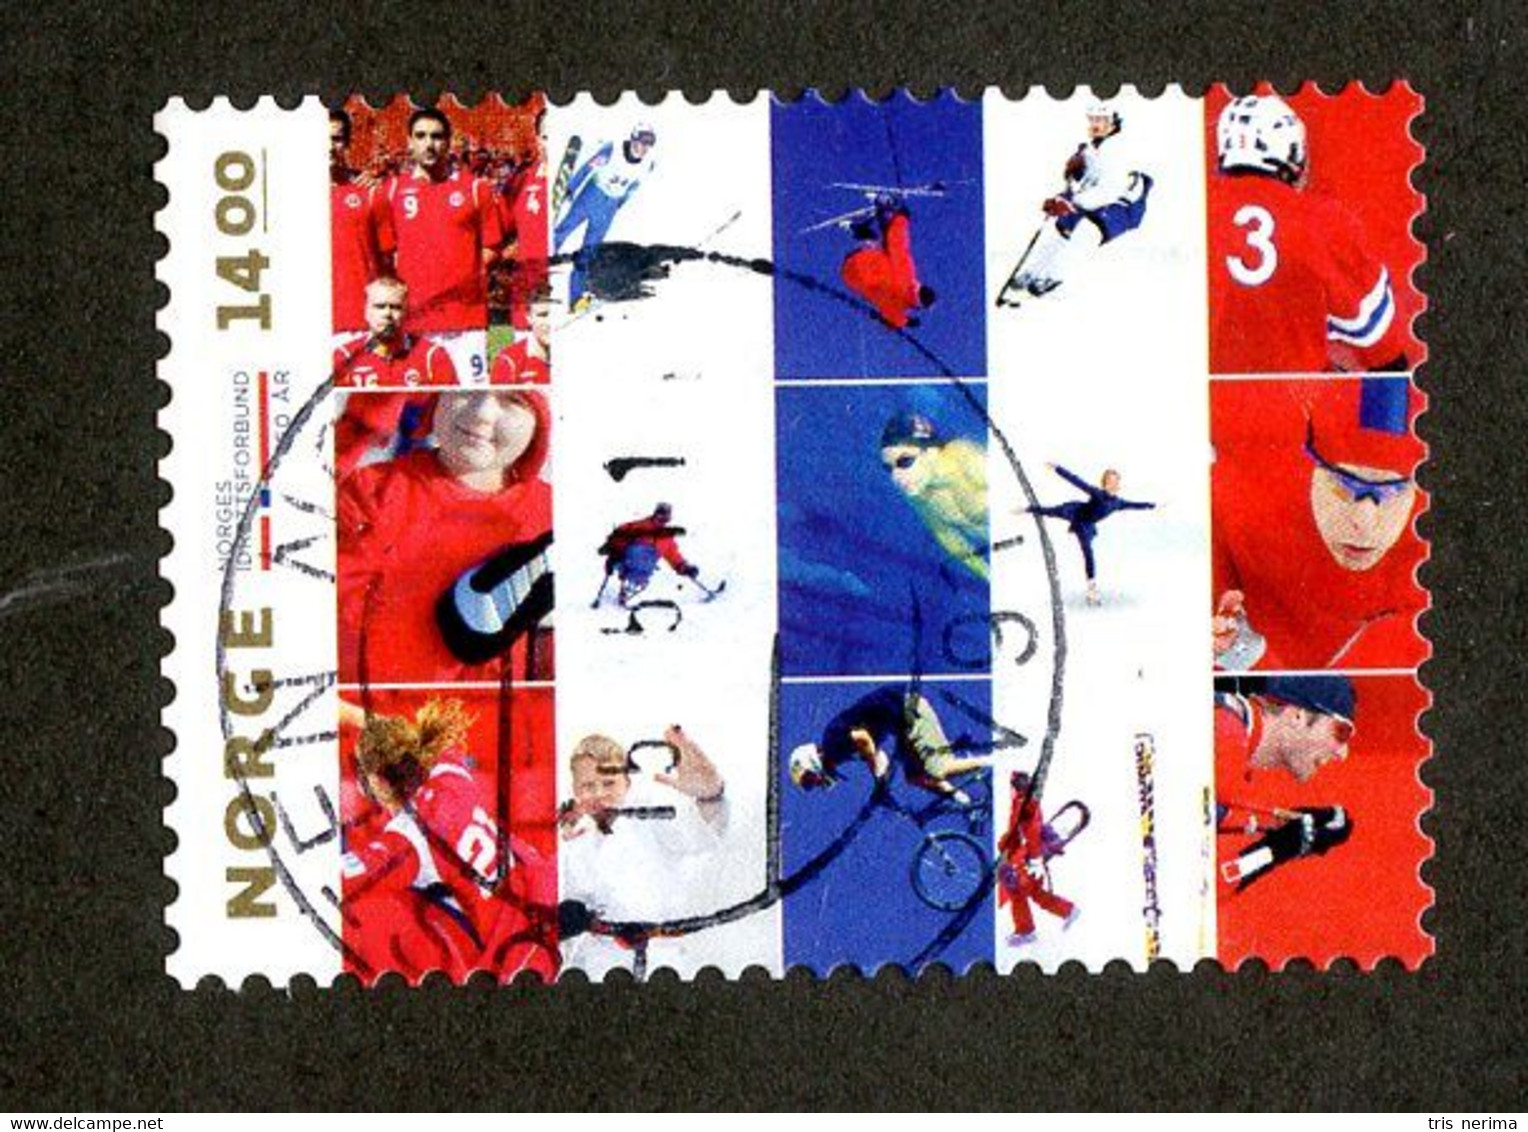 130 Norway 2011 Scott 1635 Used (Offers Welcome!) - Used Stamps